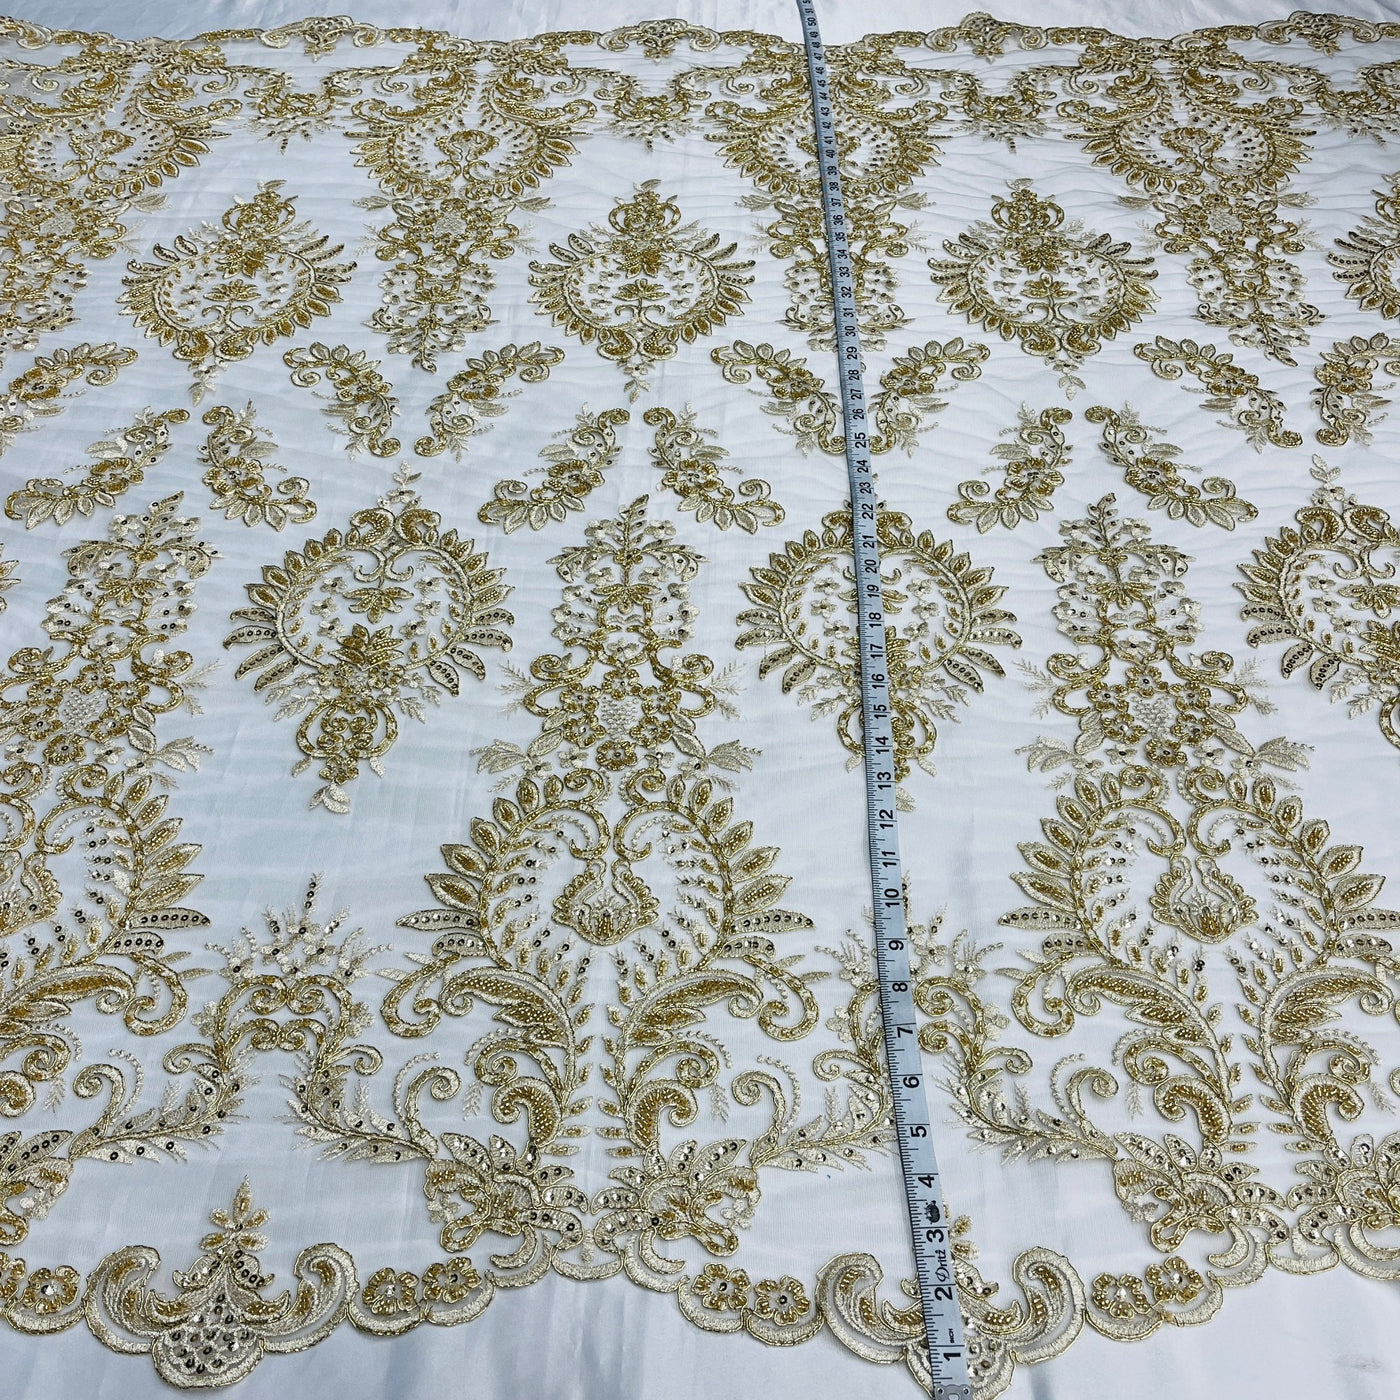 Beaded & Corded Bridal Lace Fabric Embroidered on 100% Polyester Net Mesh | Lace USA - 97160W-HB Gold